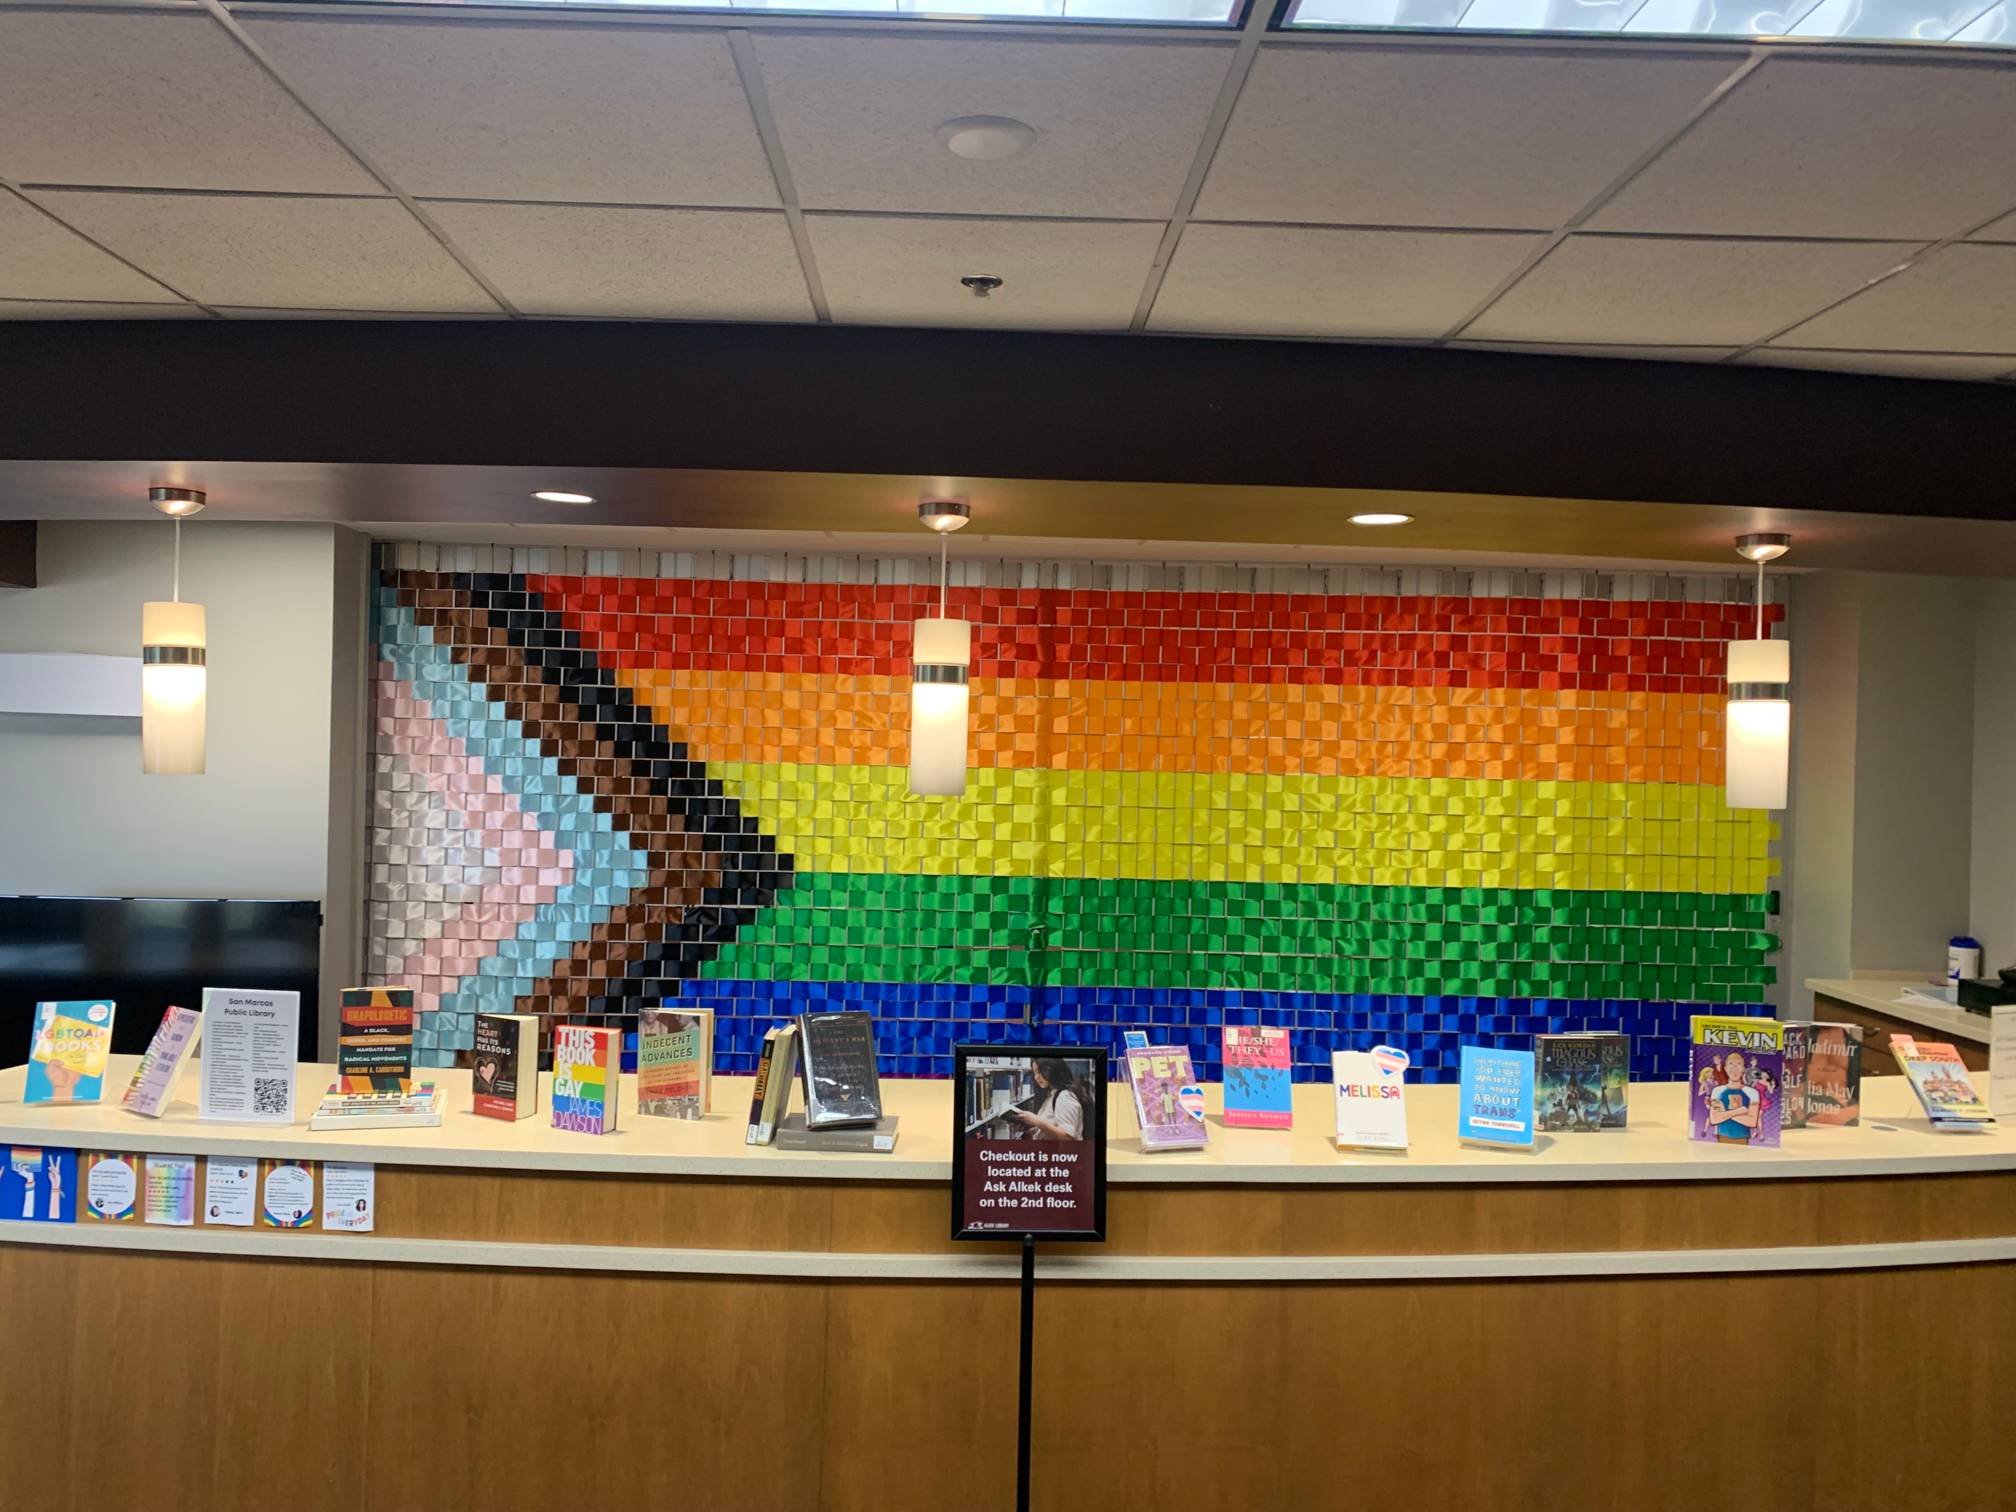 Pride flag with books related to LBGTQ topics